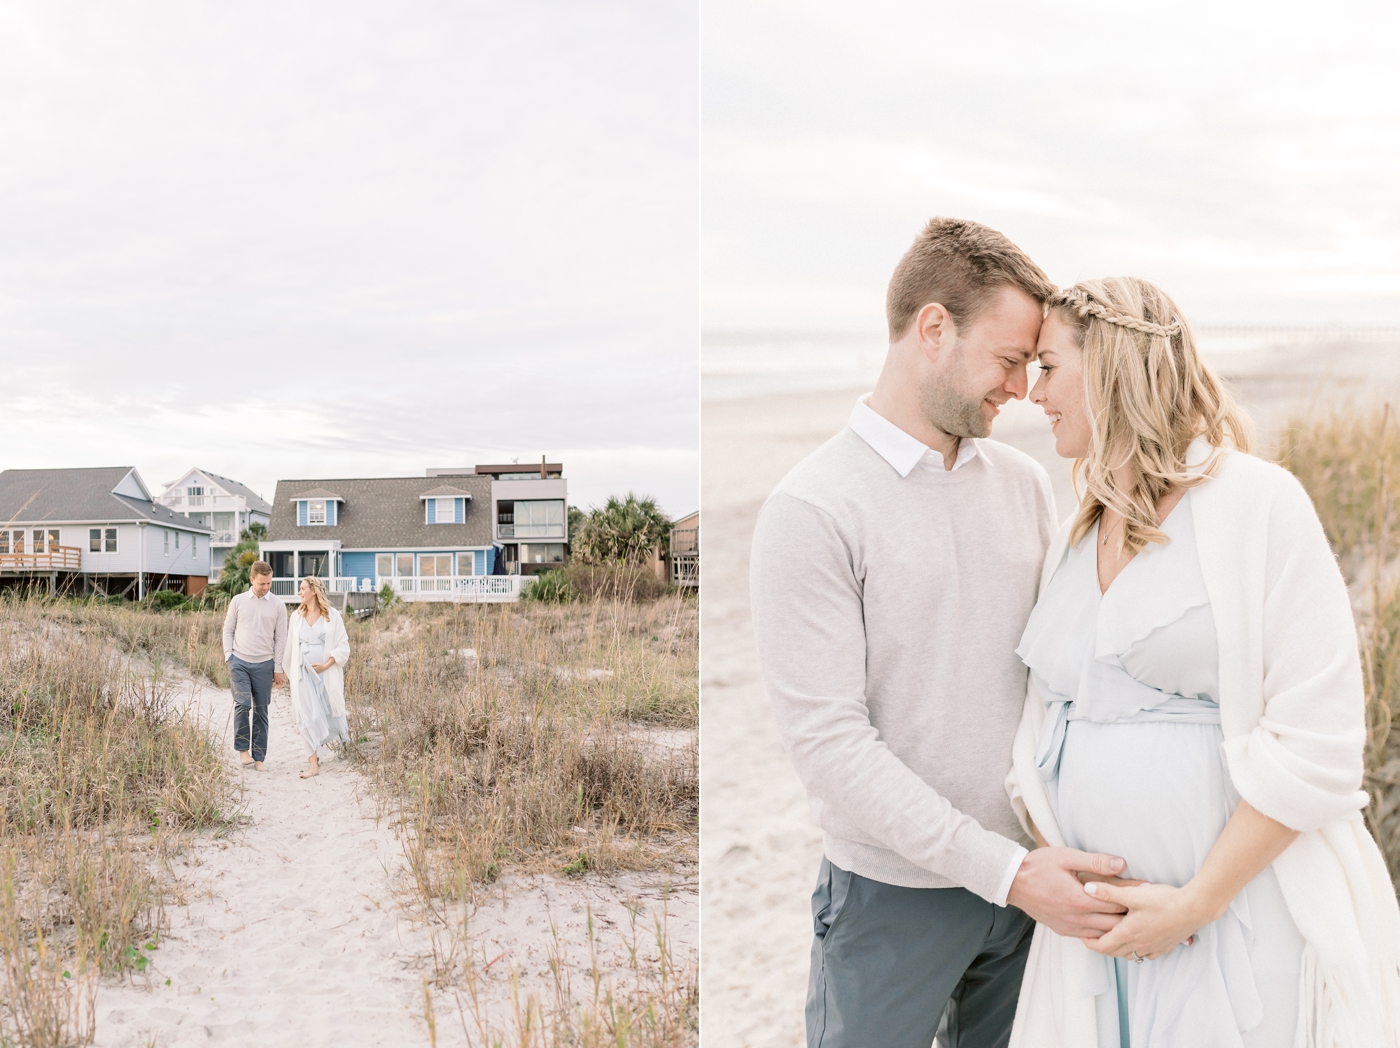 First time parents celebrating pregnancy with a babymoon at Folly Beach. Photos by Caitlyn Motycka Photography.